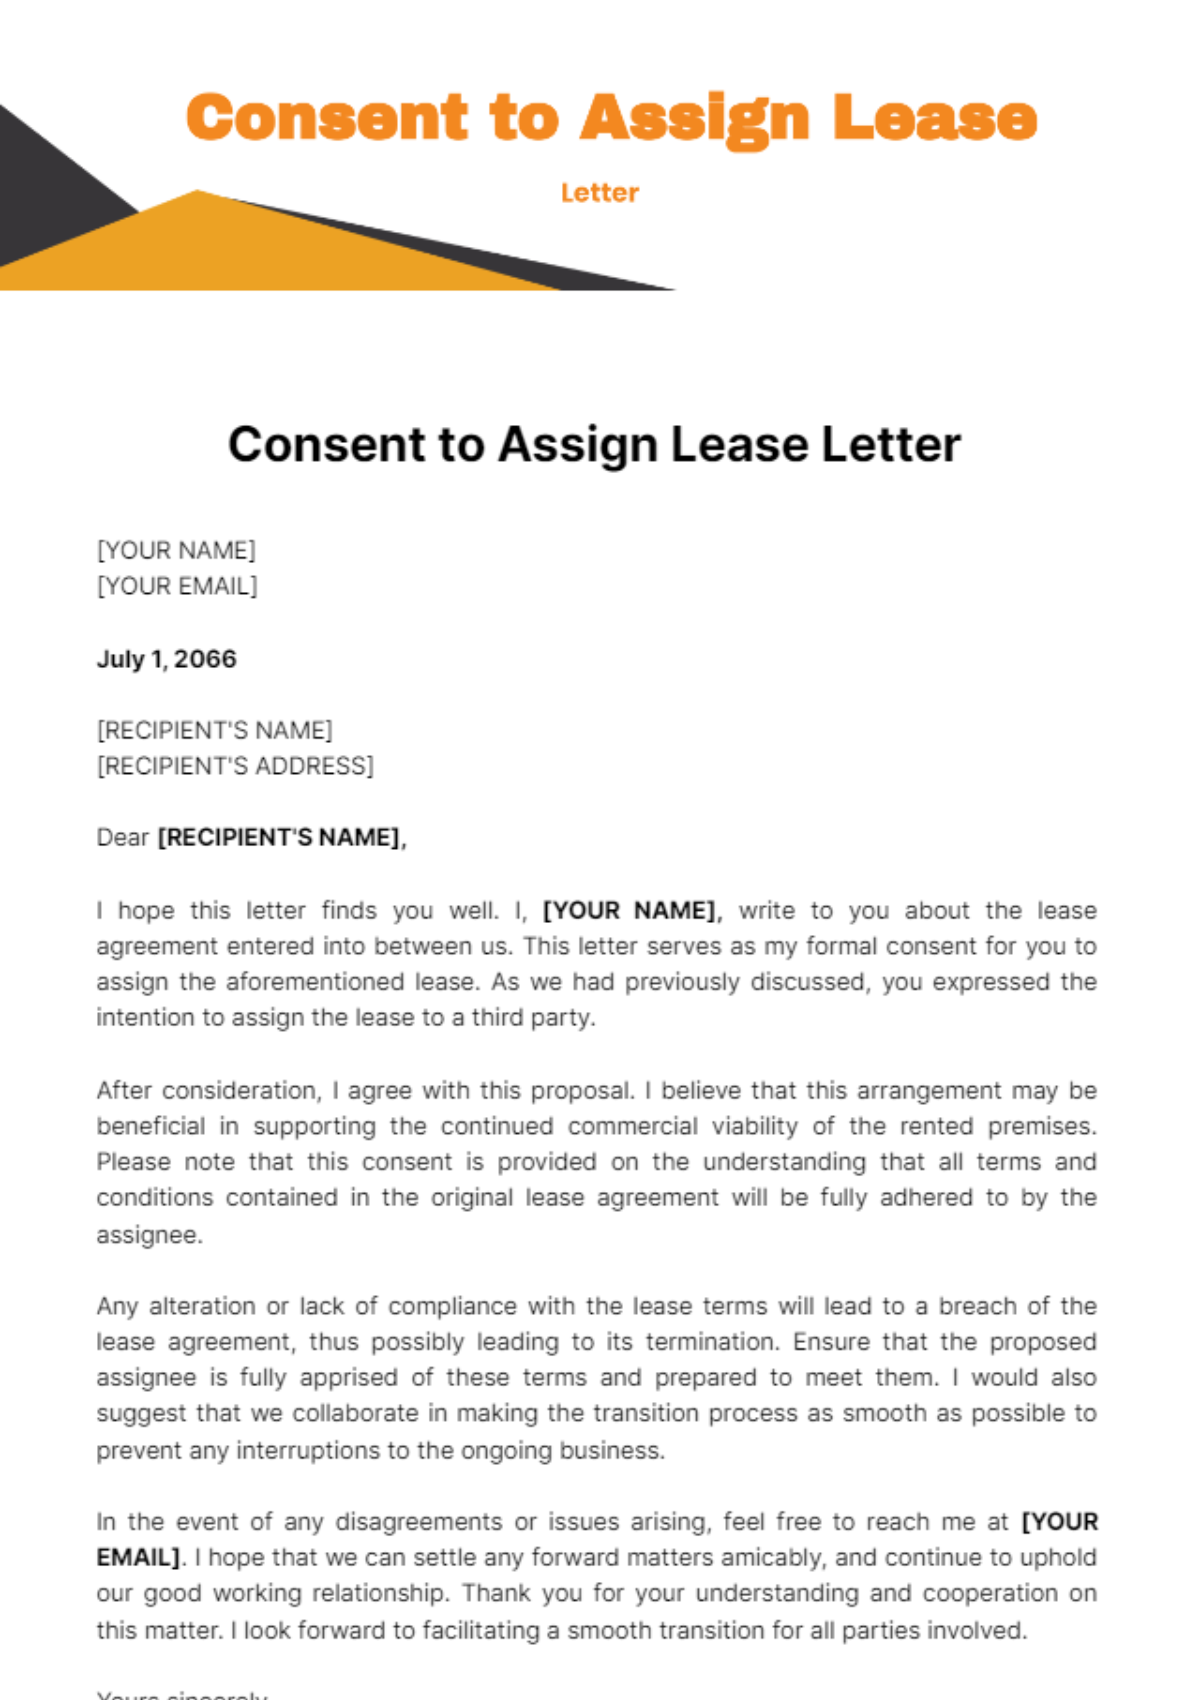 Free Consent to Assign Lease Letter Template